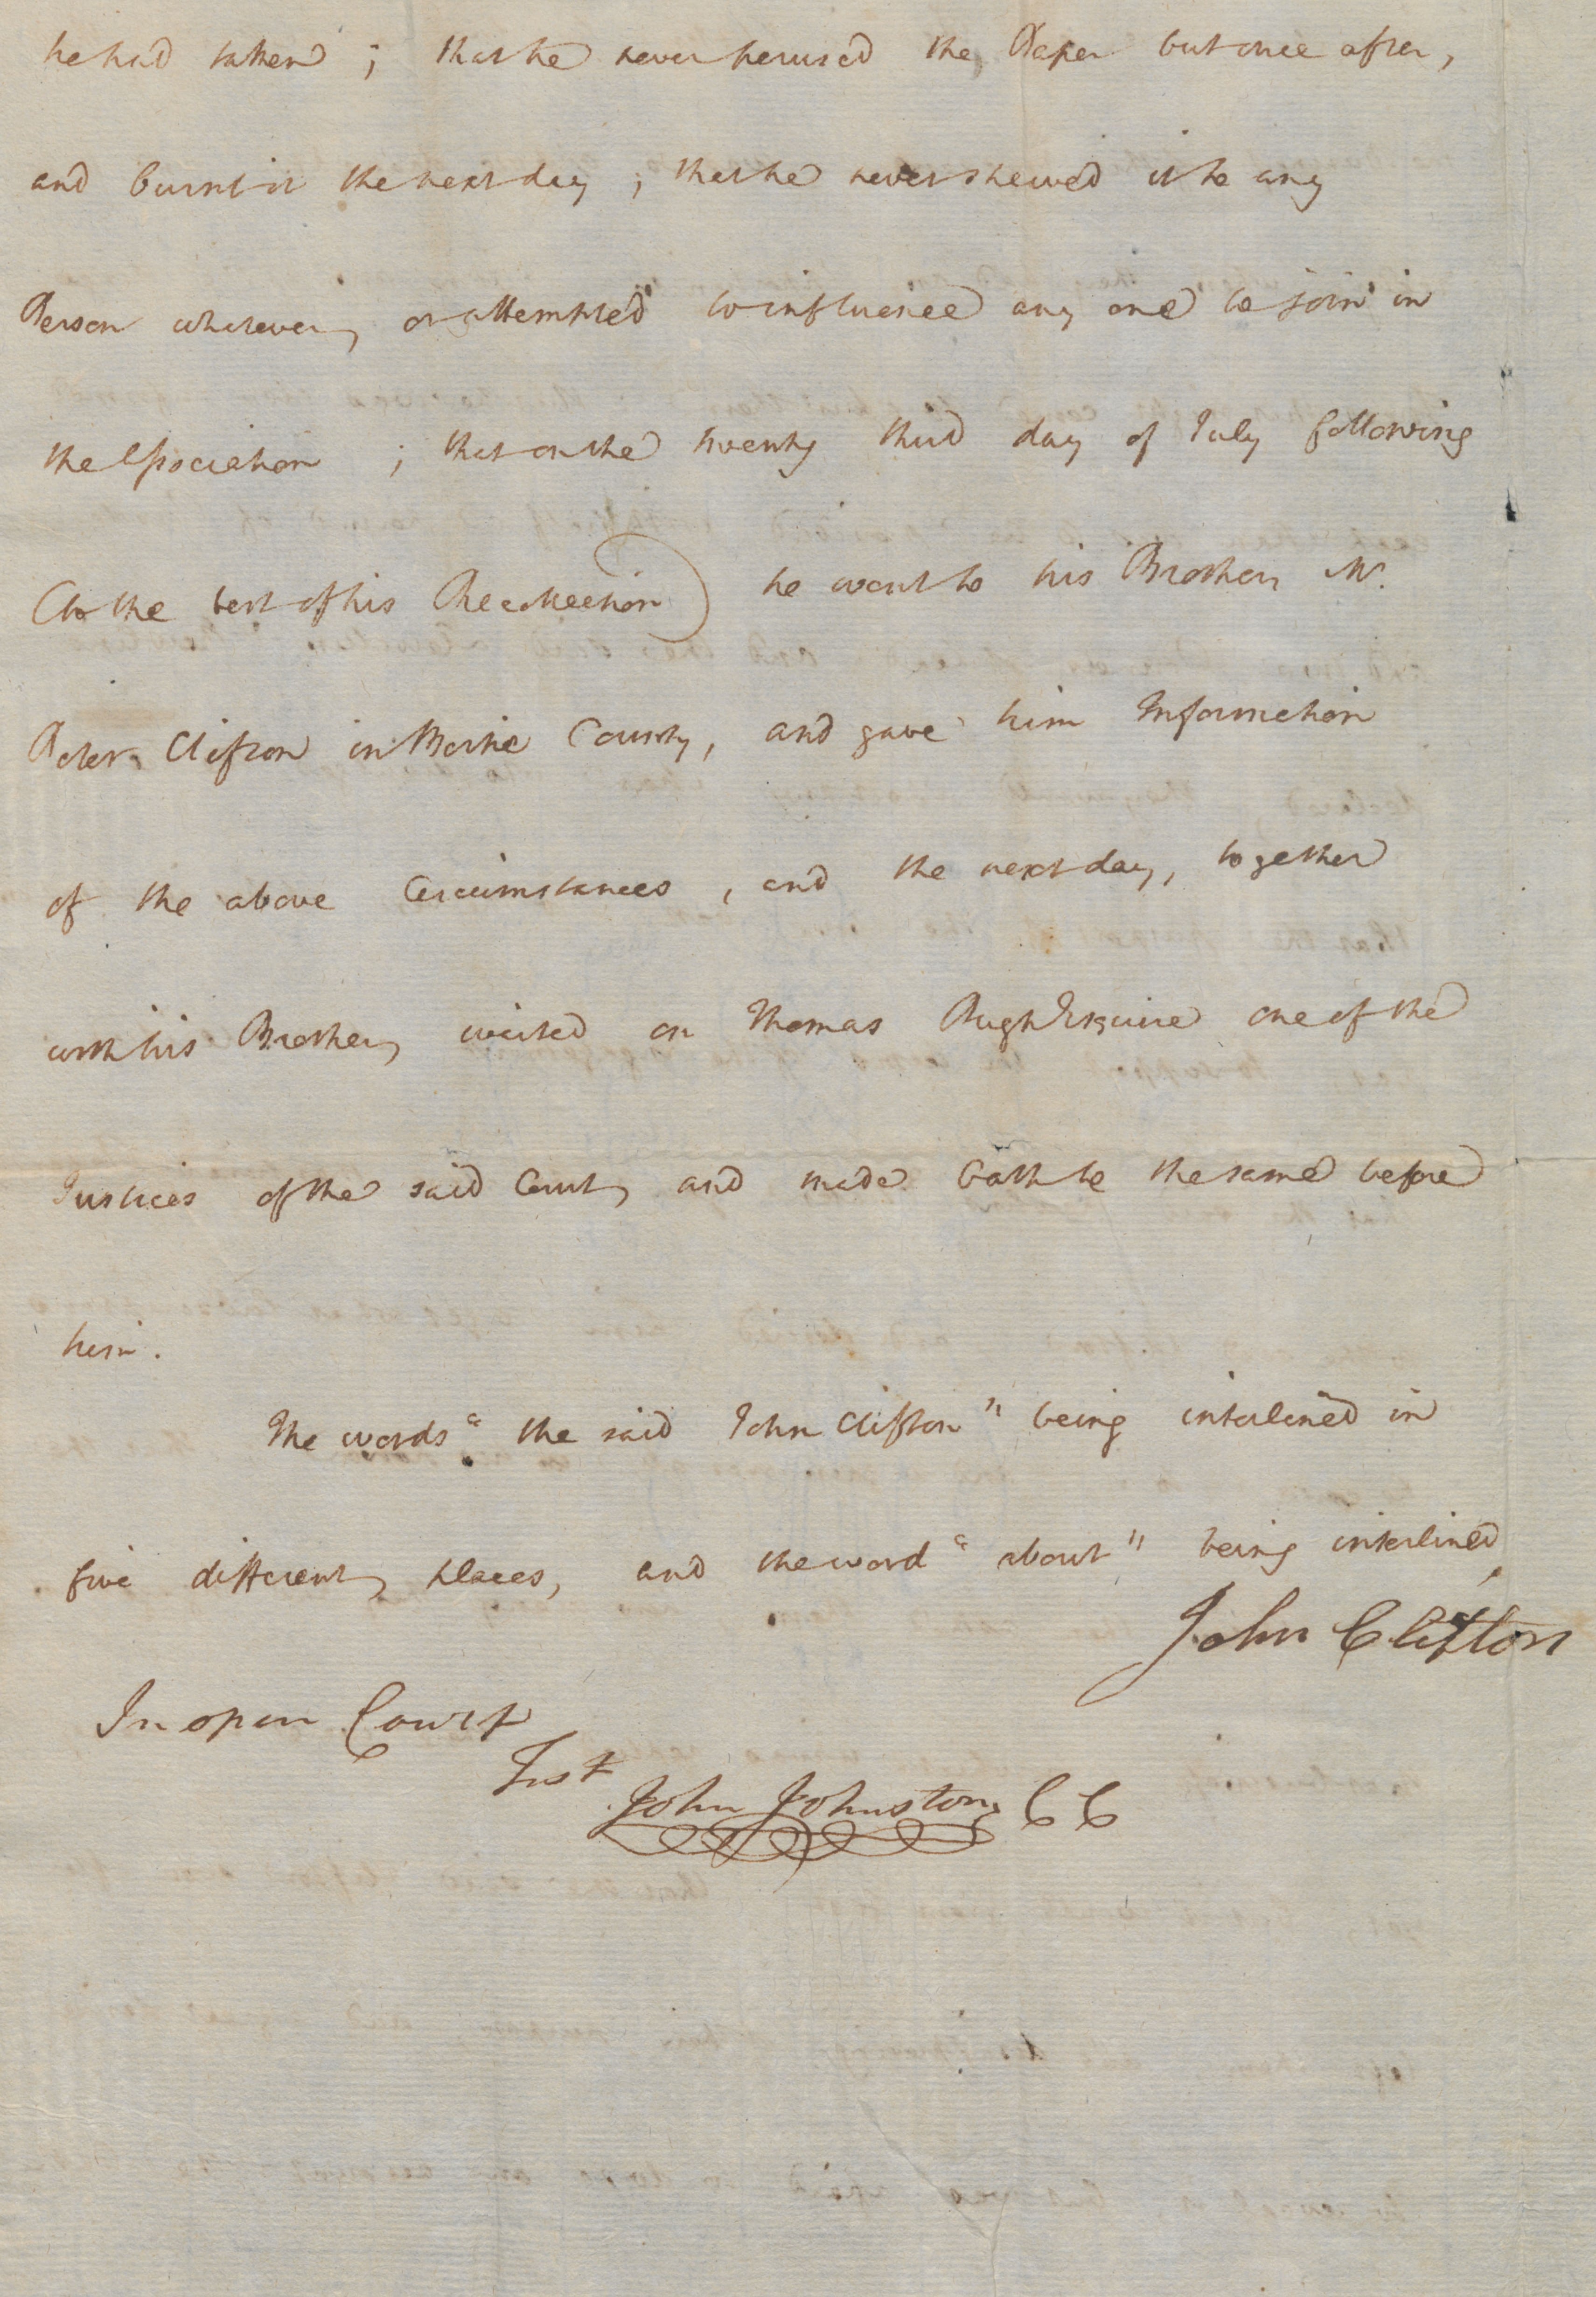 Examination of John Clifton before the Bertie County Court, 12 August 1777, page 6